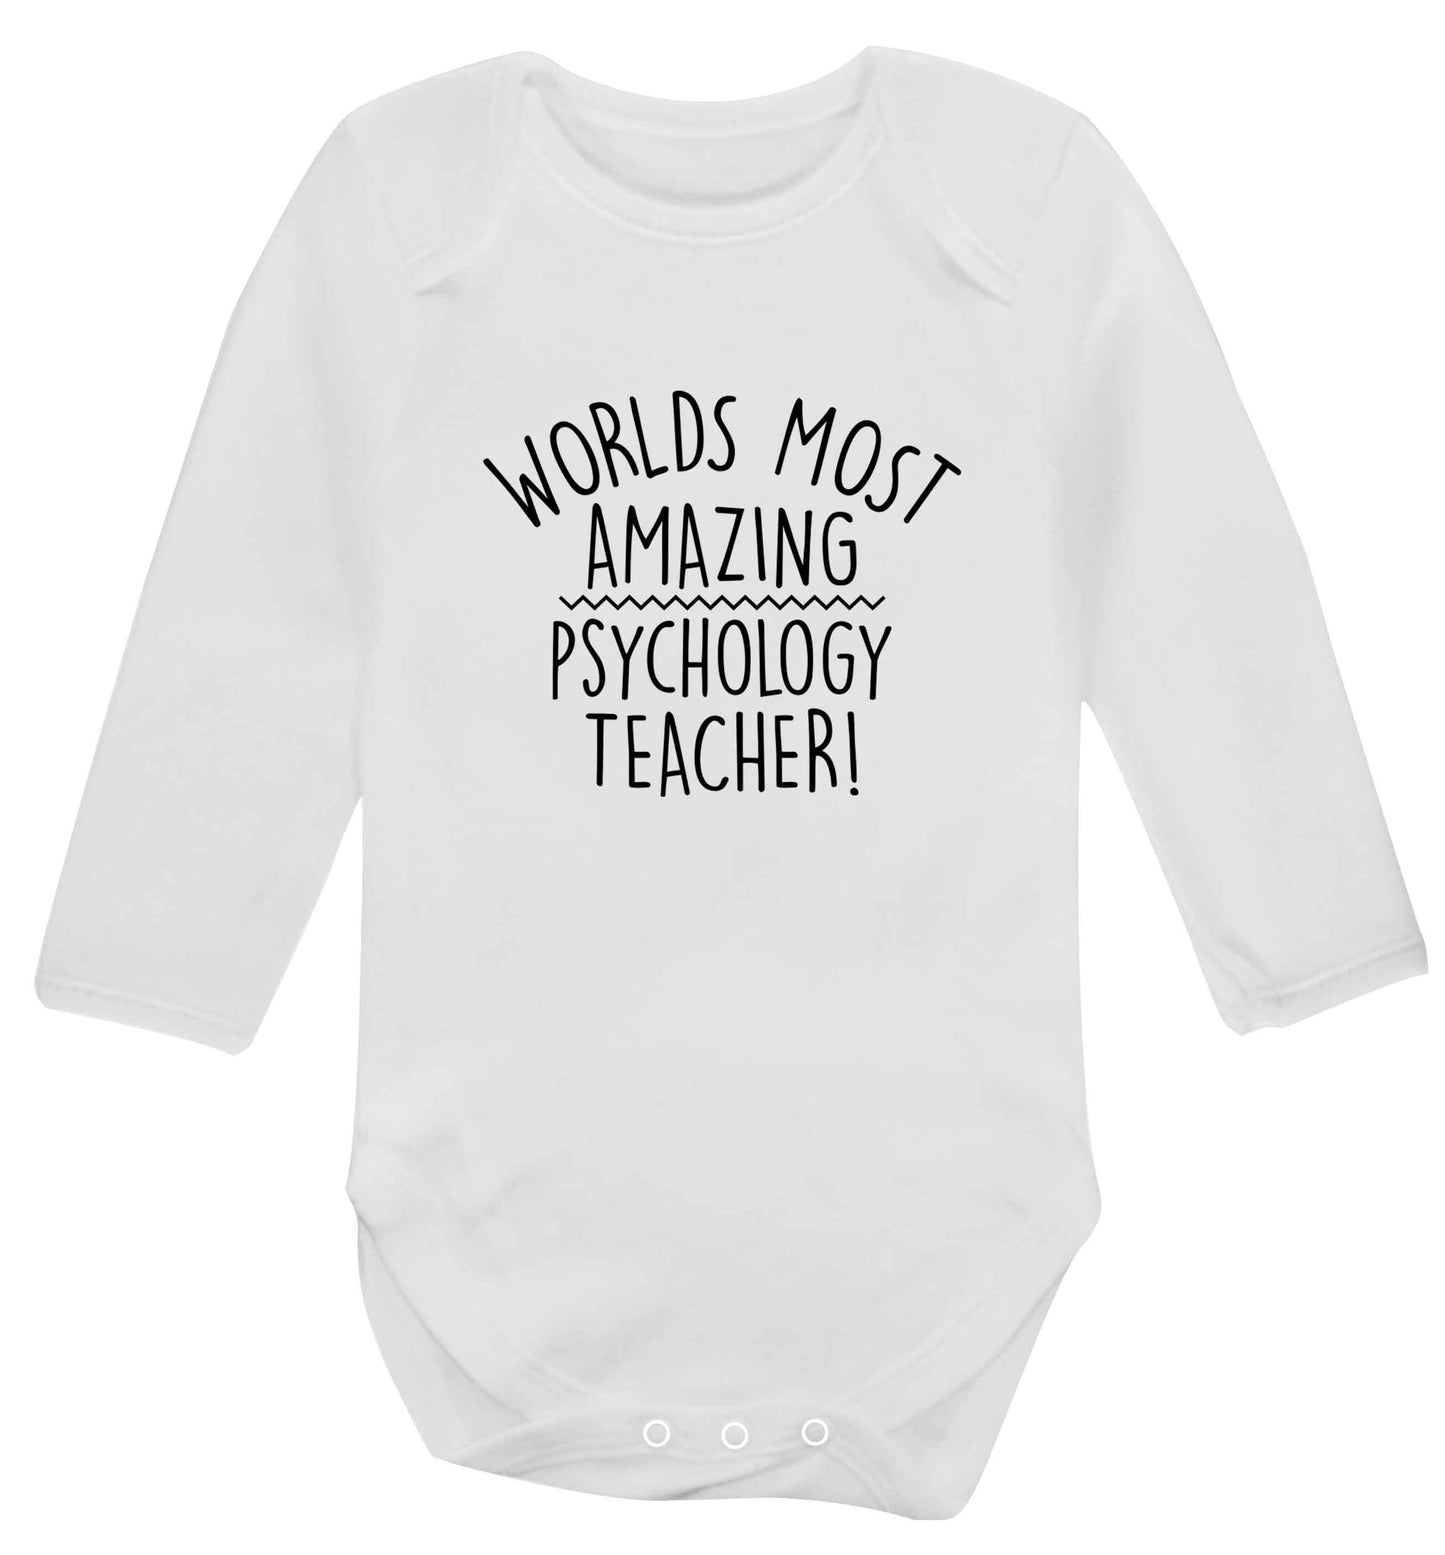 Worlds most amazing psychology teacher baby vest long sleeved white 6-12 months